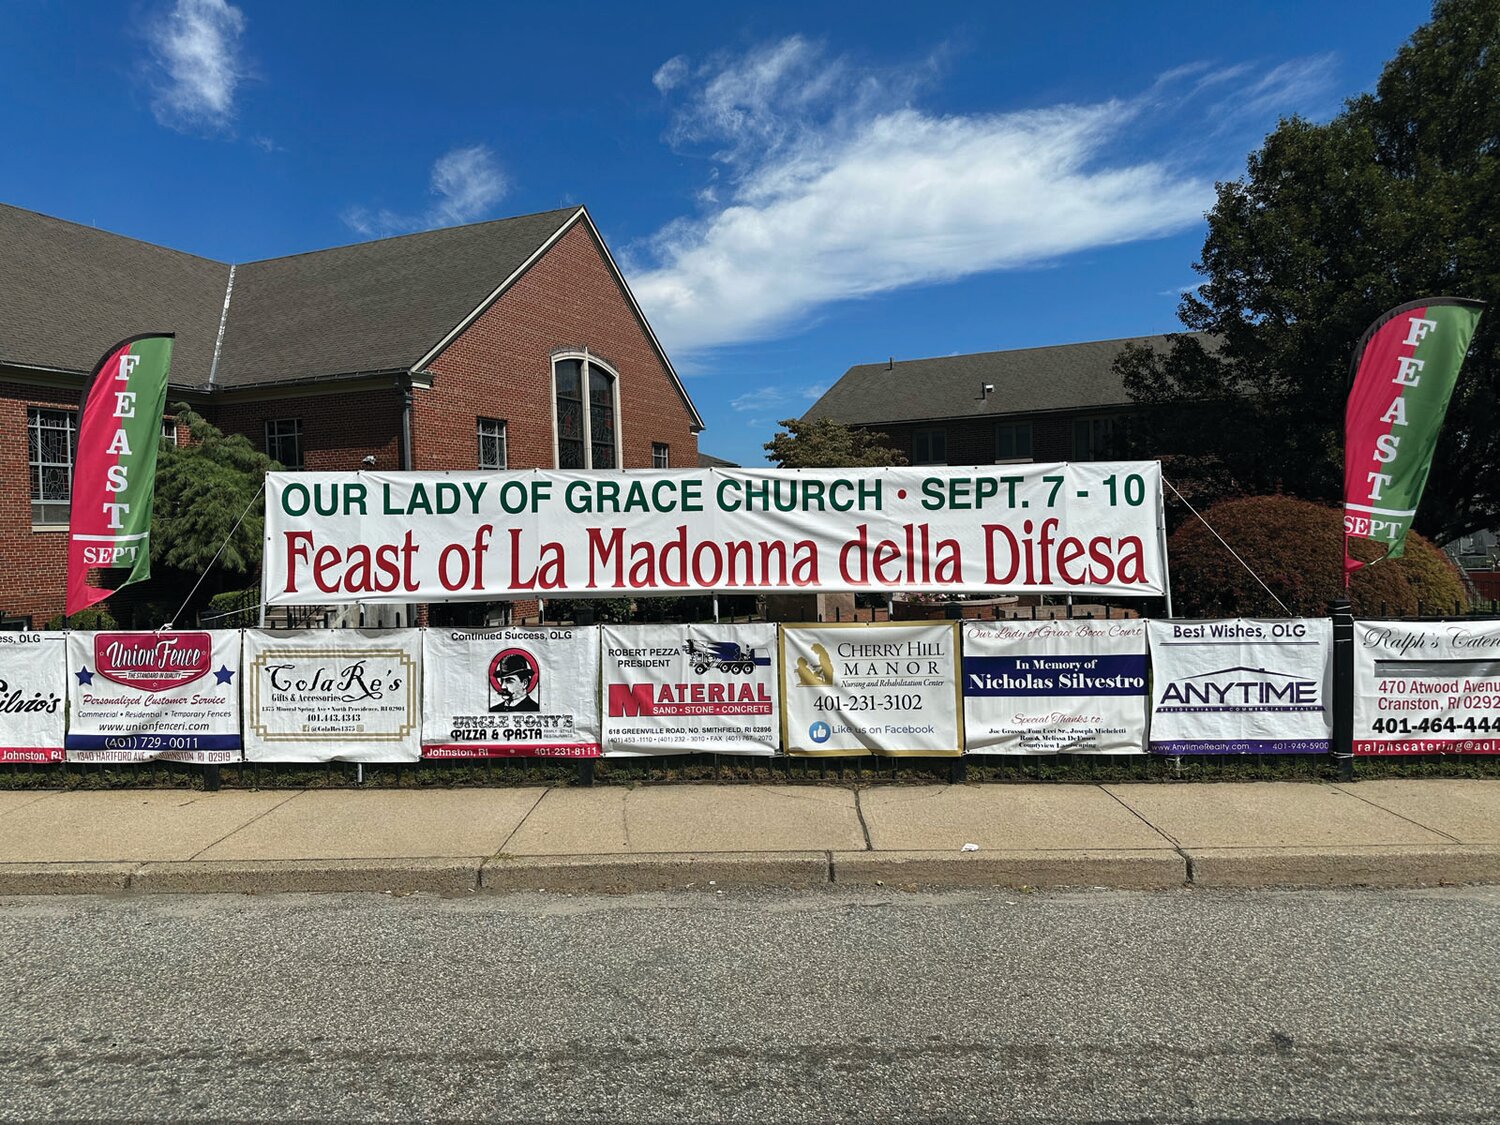 WARM WELCOME: This banner says it all about The Feast of La Madonna DiFesa that will open a four-day stay tonight in Johnston.